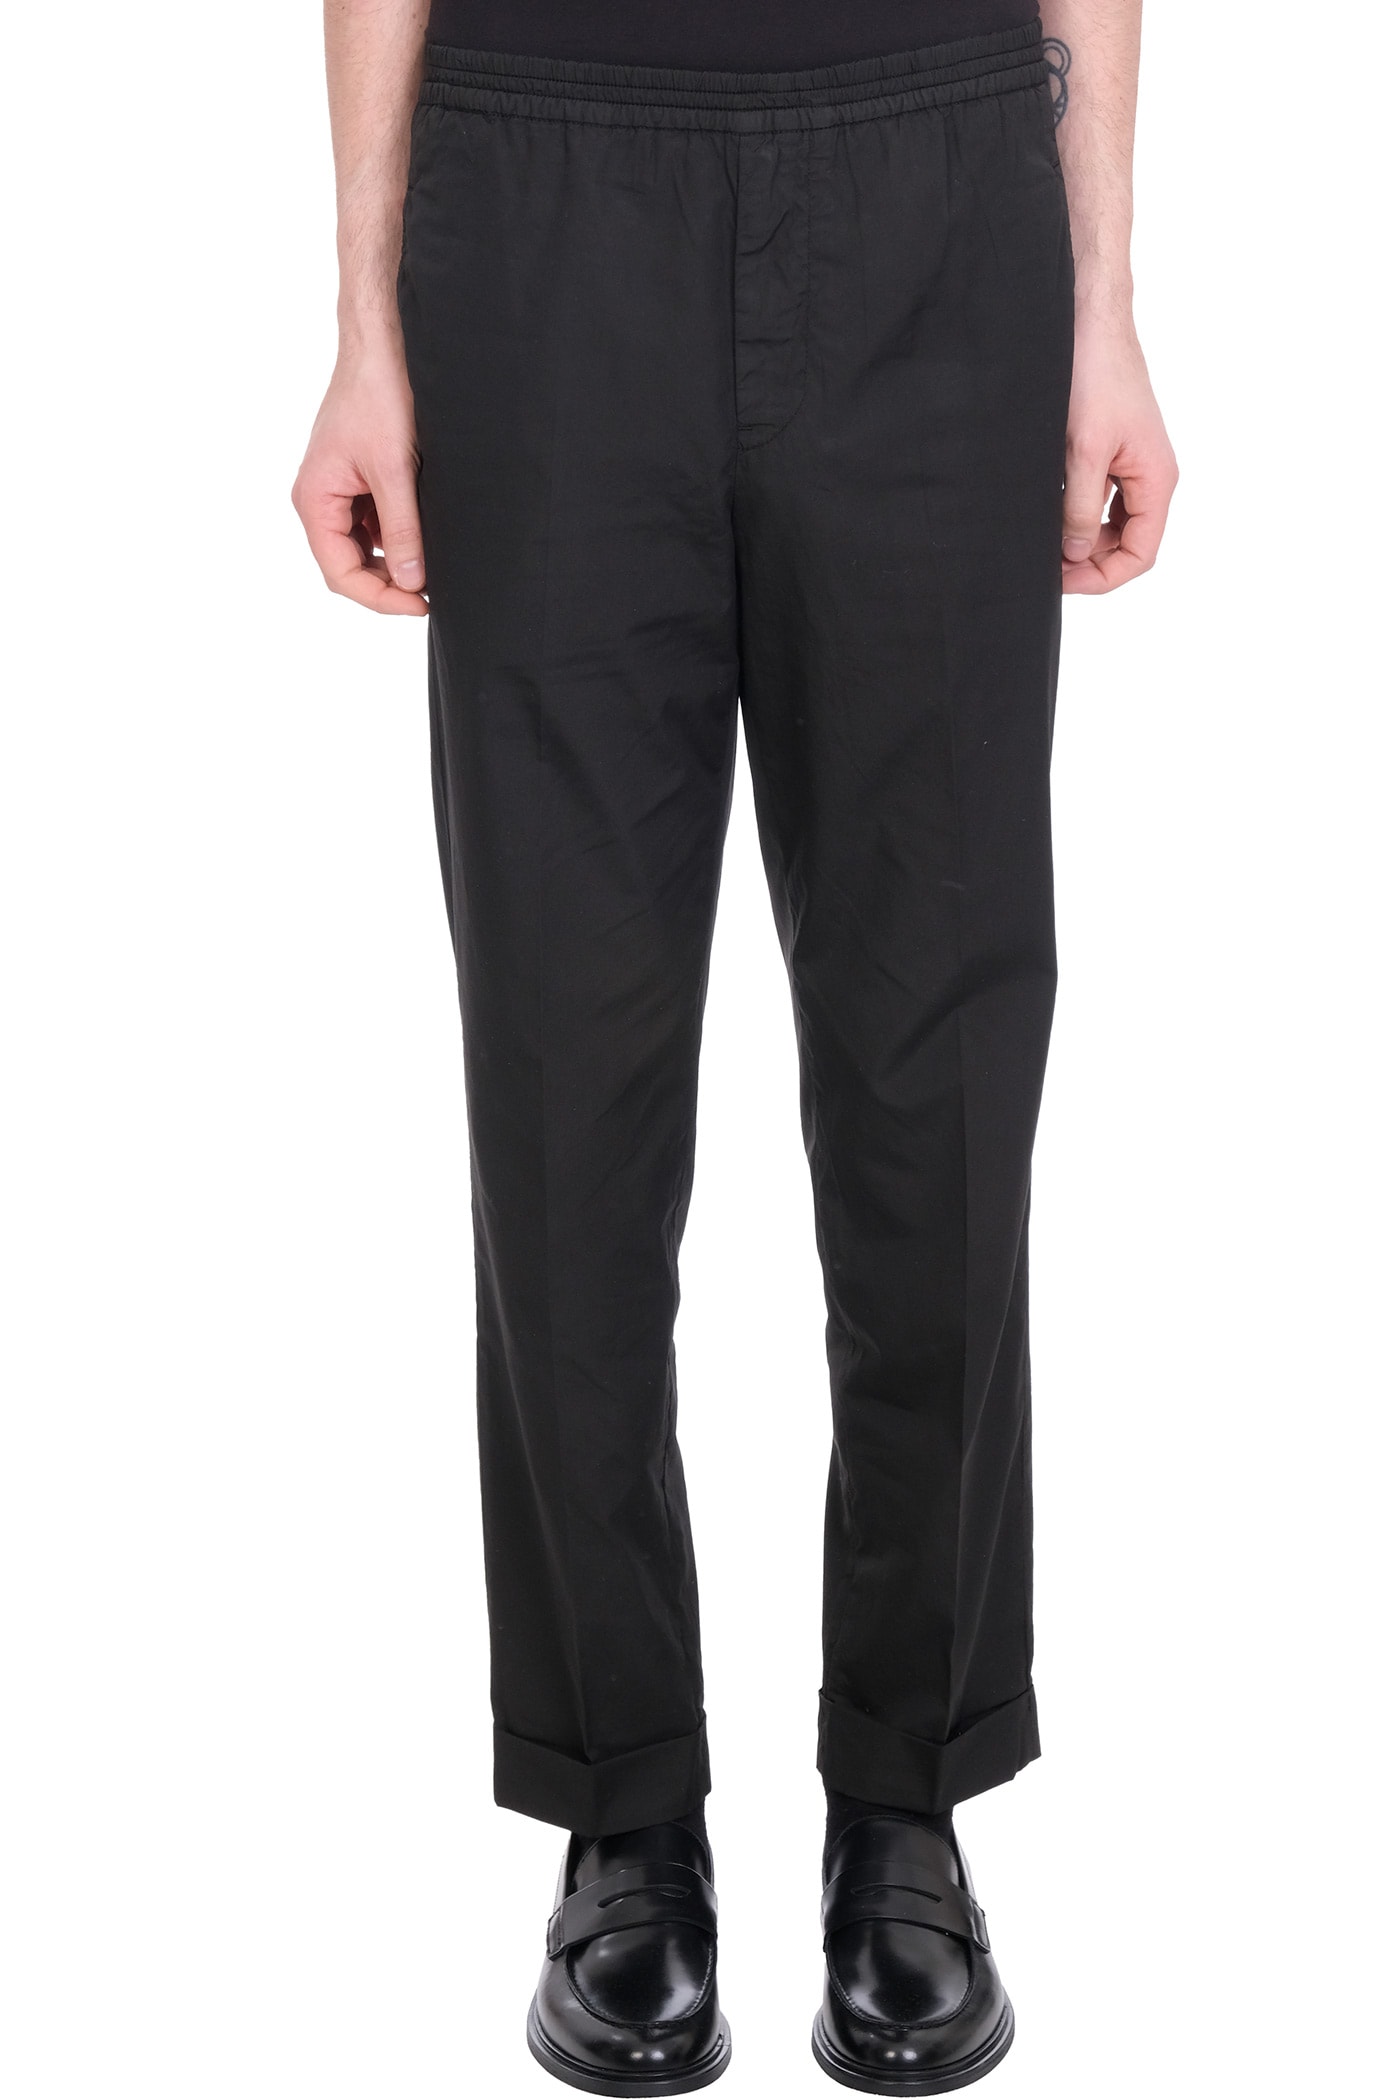 Mauro Grifoni Pants In Black Cotton